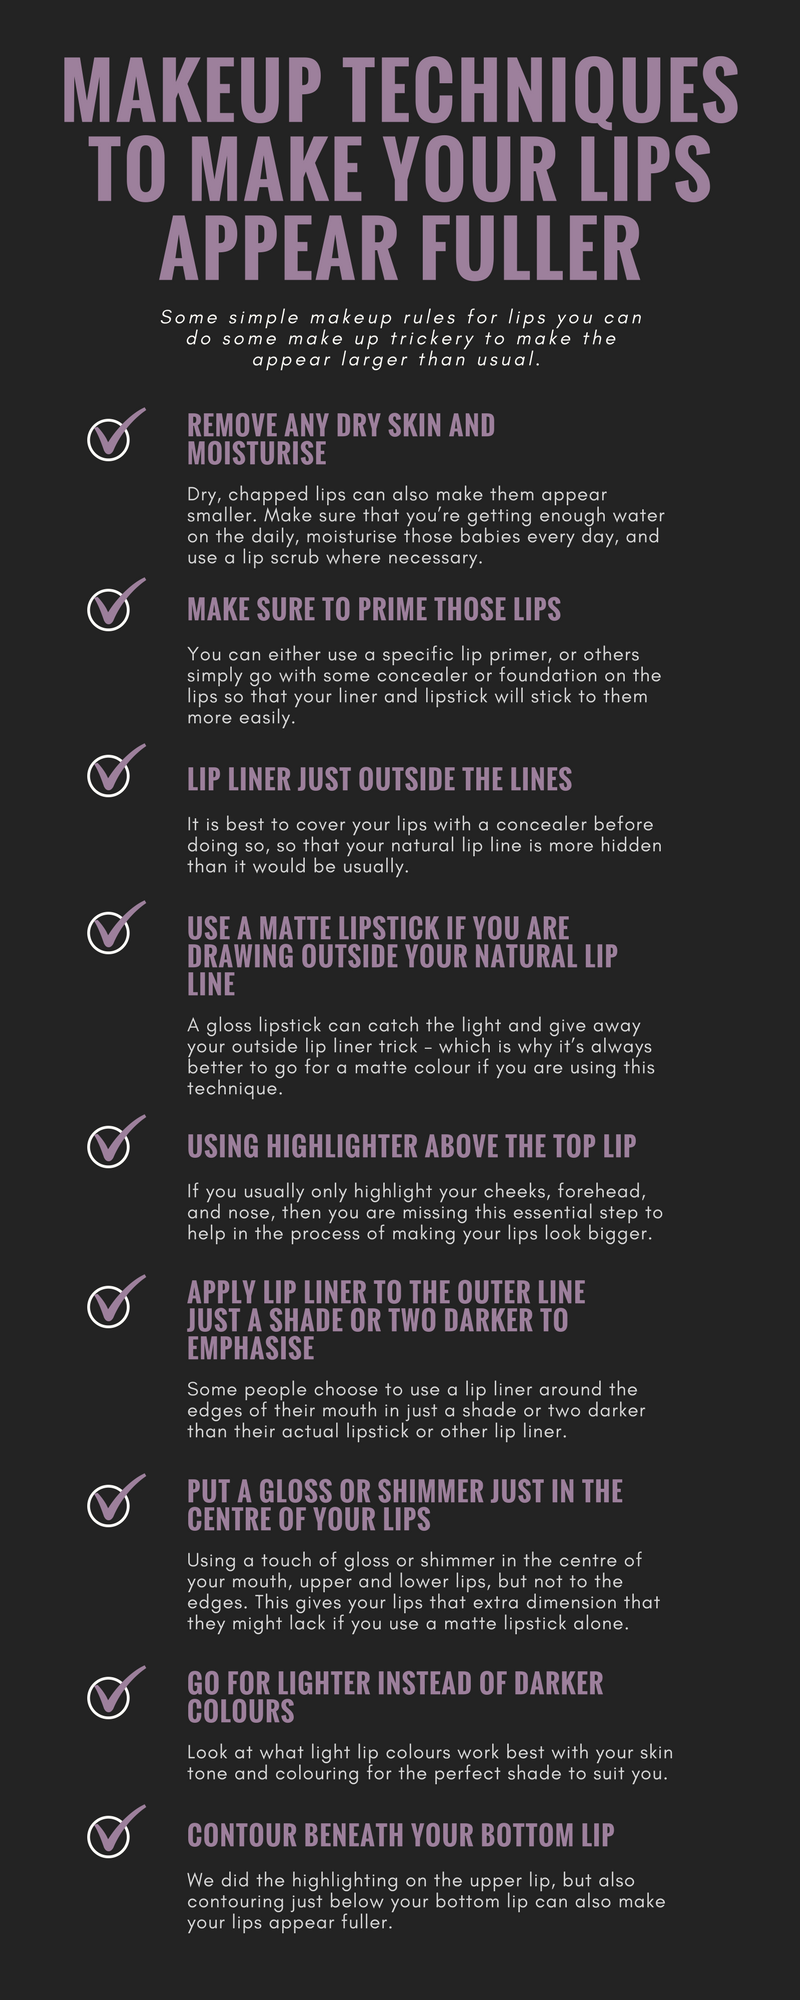 Makeup Techniques to Make Your Lips Appear Fuller